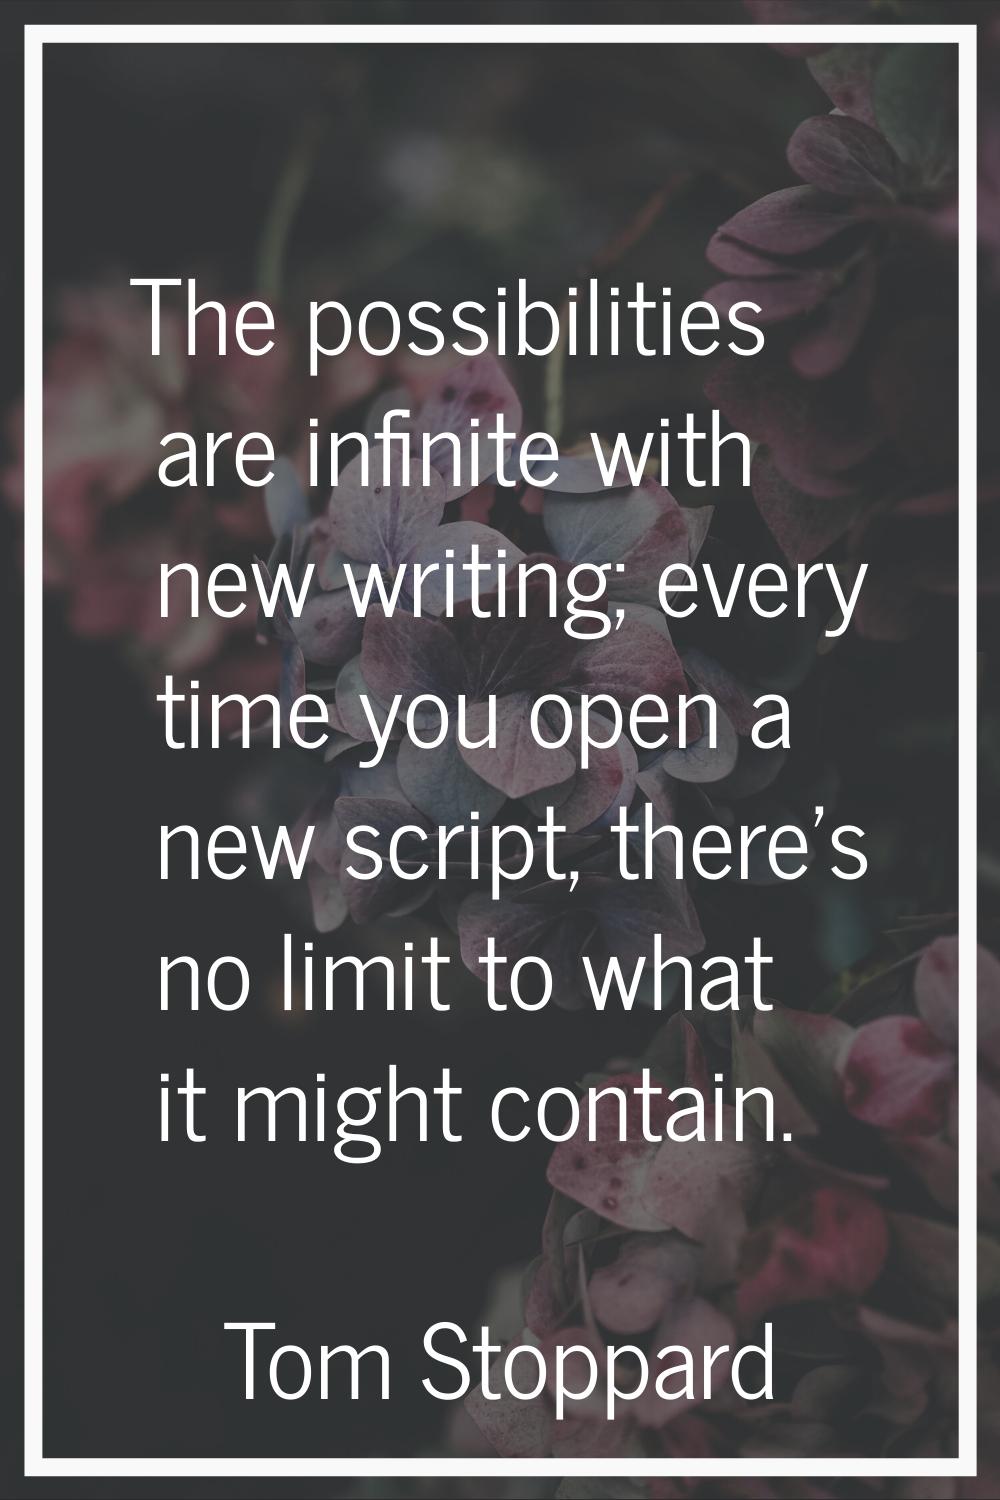 The possibilities are infinite with new writing; every time you open a new script, there's no limit